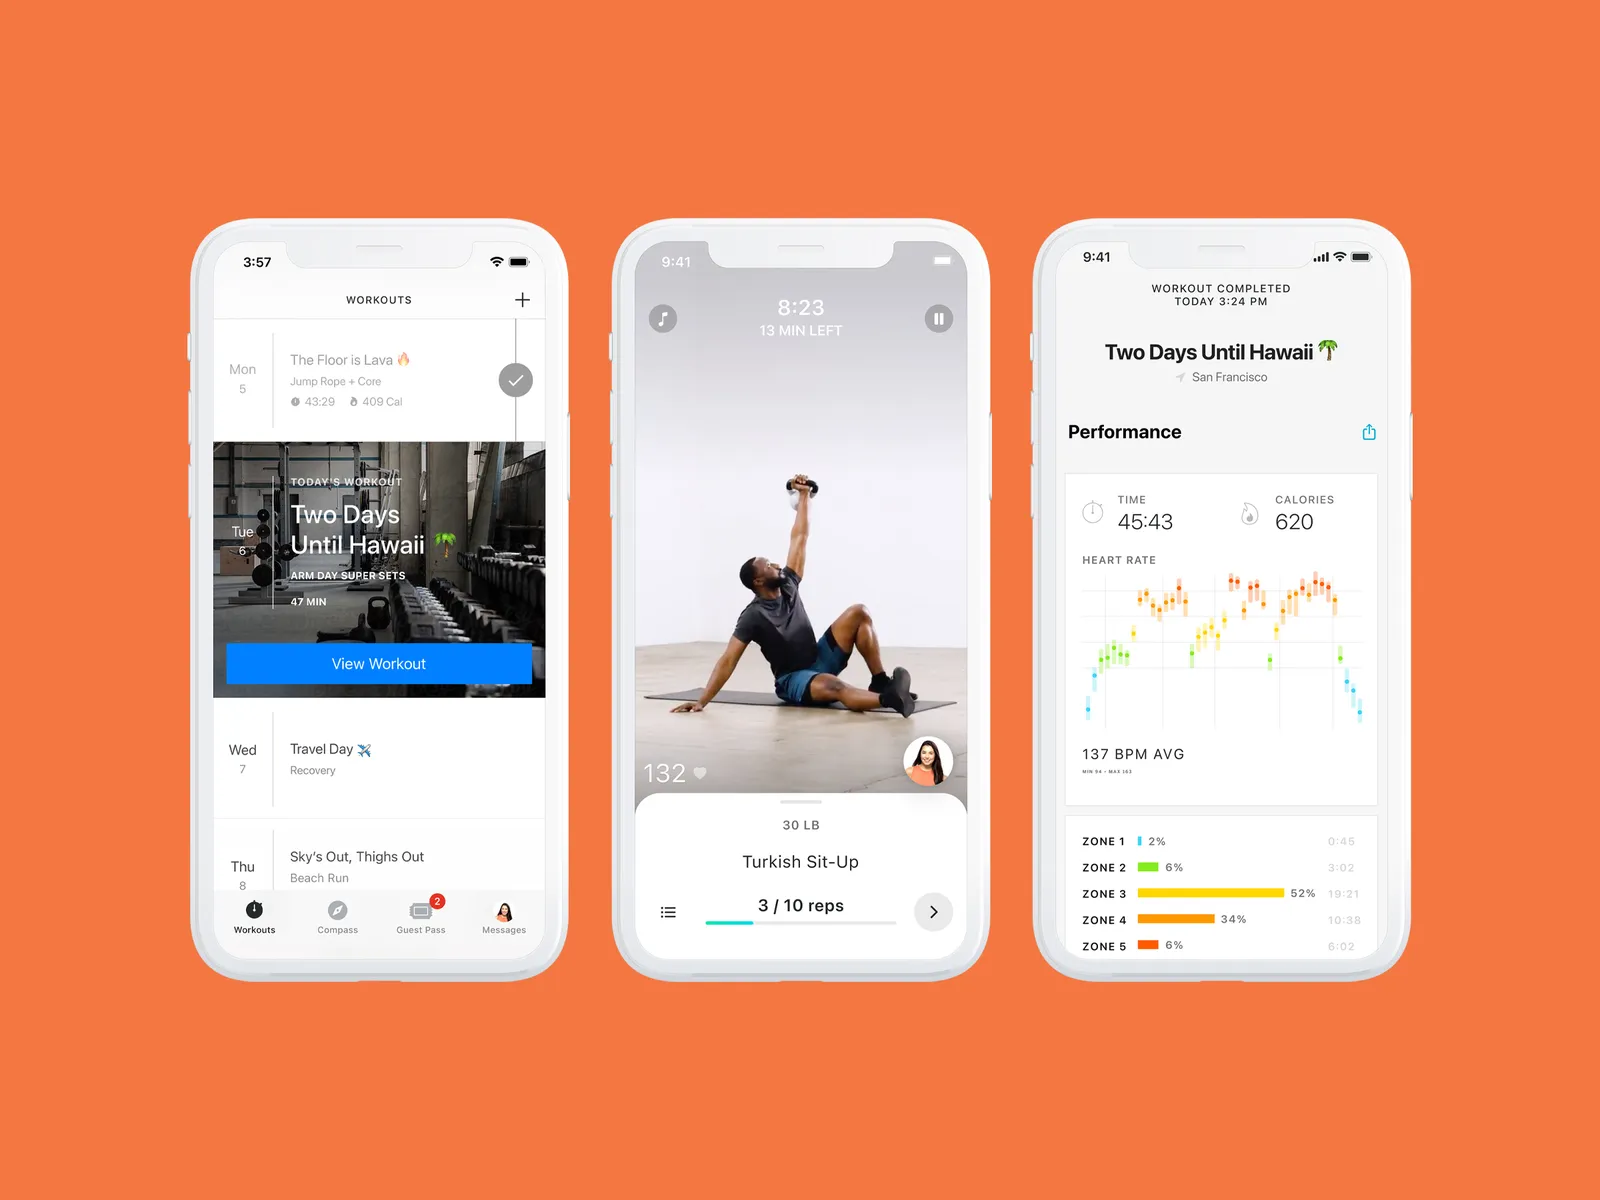 Future App for Connection Users to Real Personal Trainers Virtually